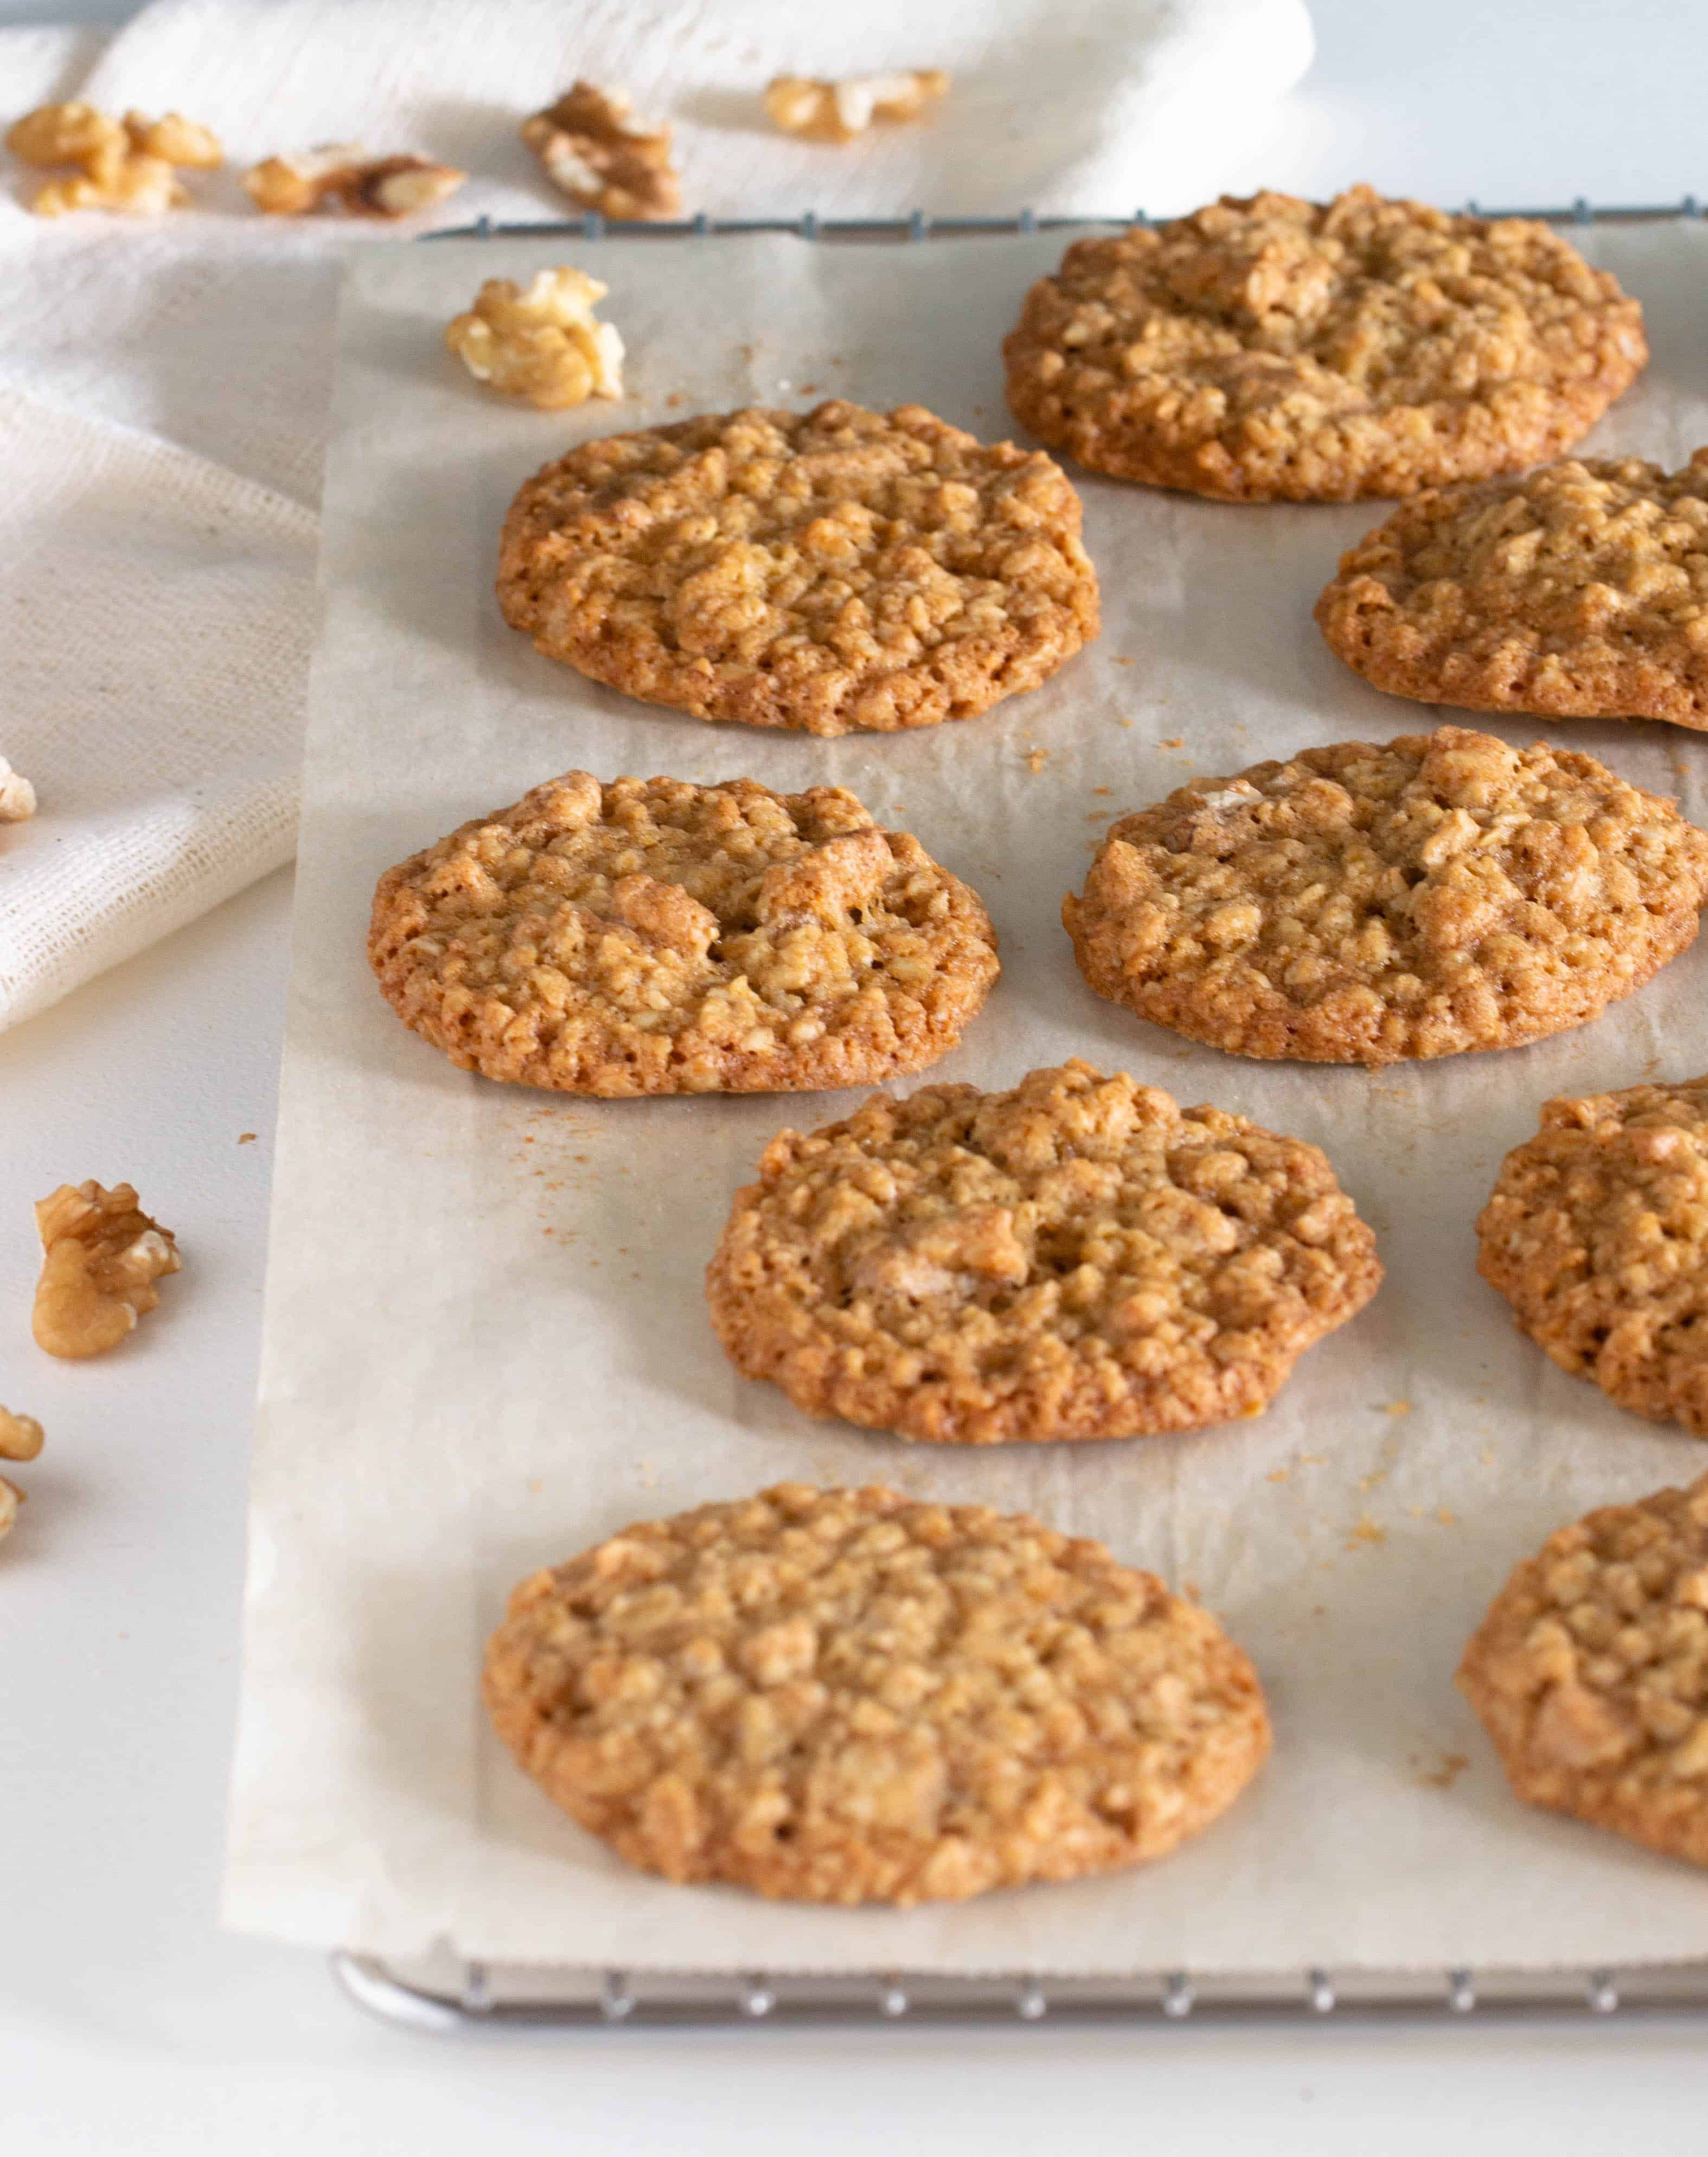 Single layer of oatmeal cookies on parchment paper, white table, loose walnuts